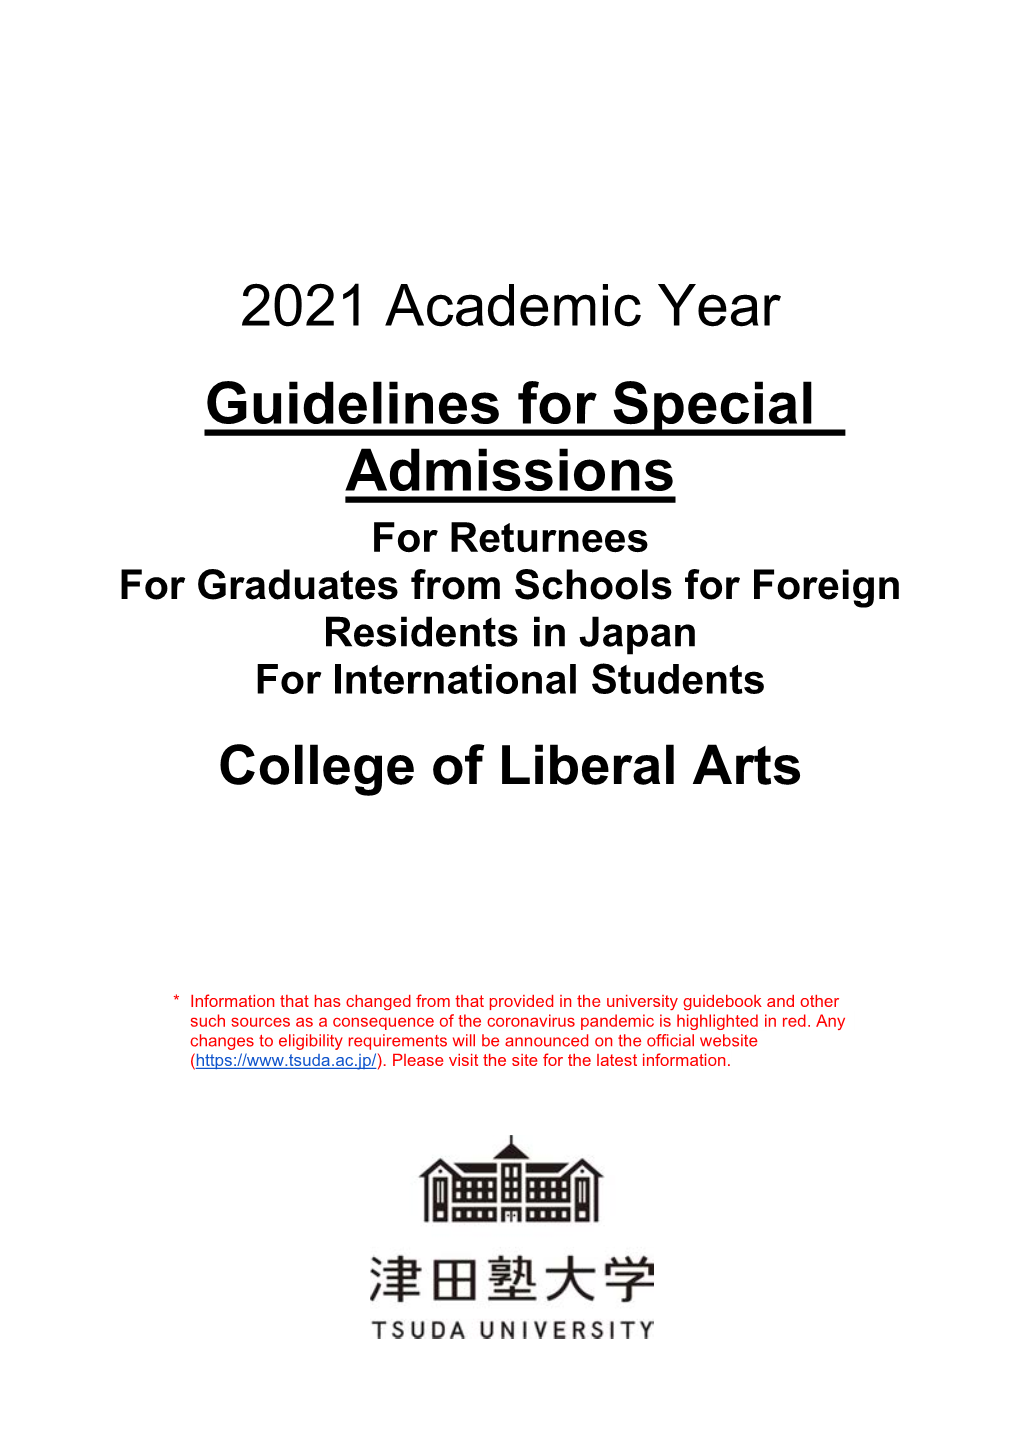 2021 Academic Year Guidelines for Special Admissions